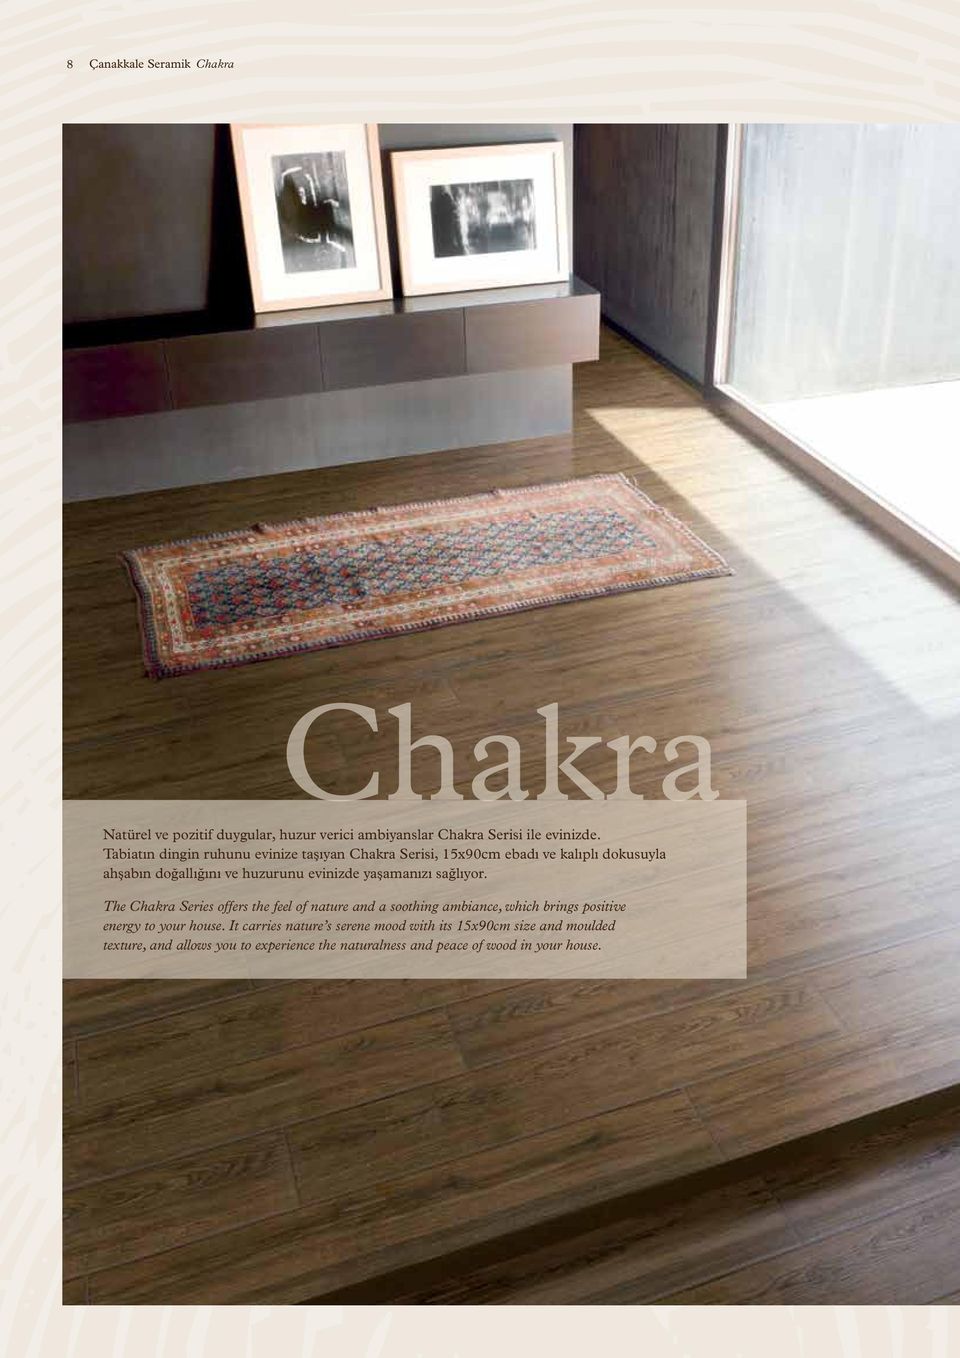 yaşamanızı sağlıyor. The Chakra Series offers the feel of nature and a soothing ambiance, which brings positive energy to your house.